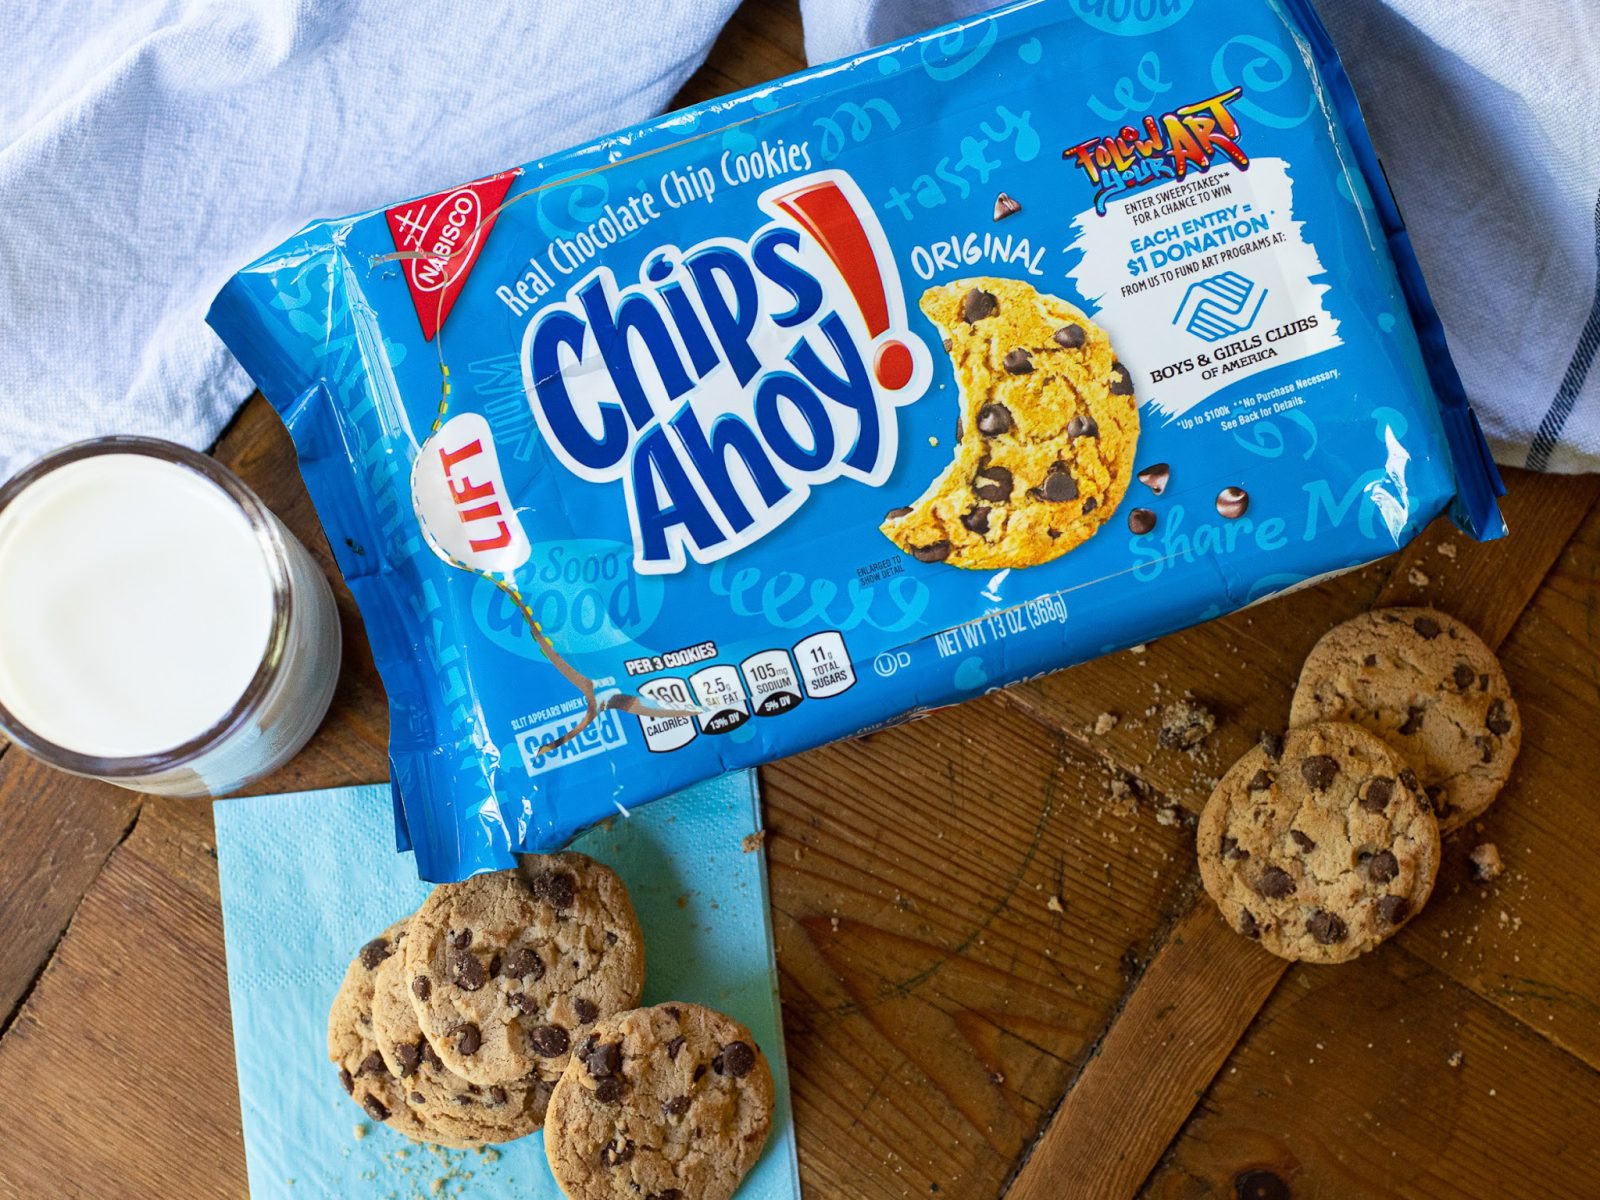 Get Nabisco Chips Ahoy! Cookies For As Low As $1.63 At Publix